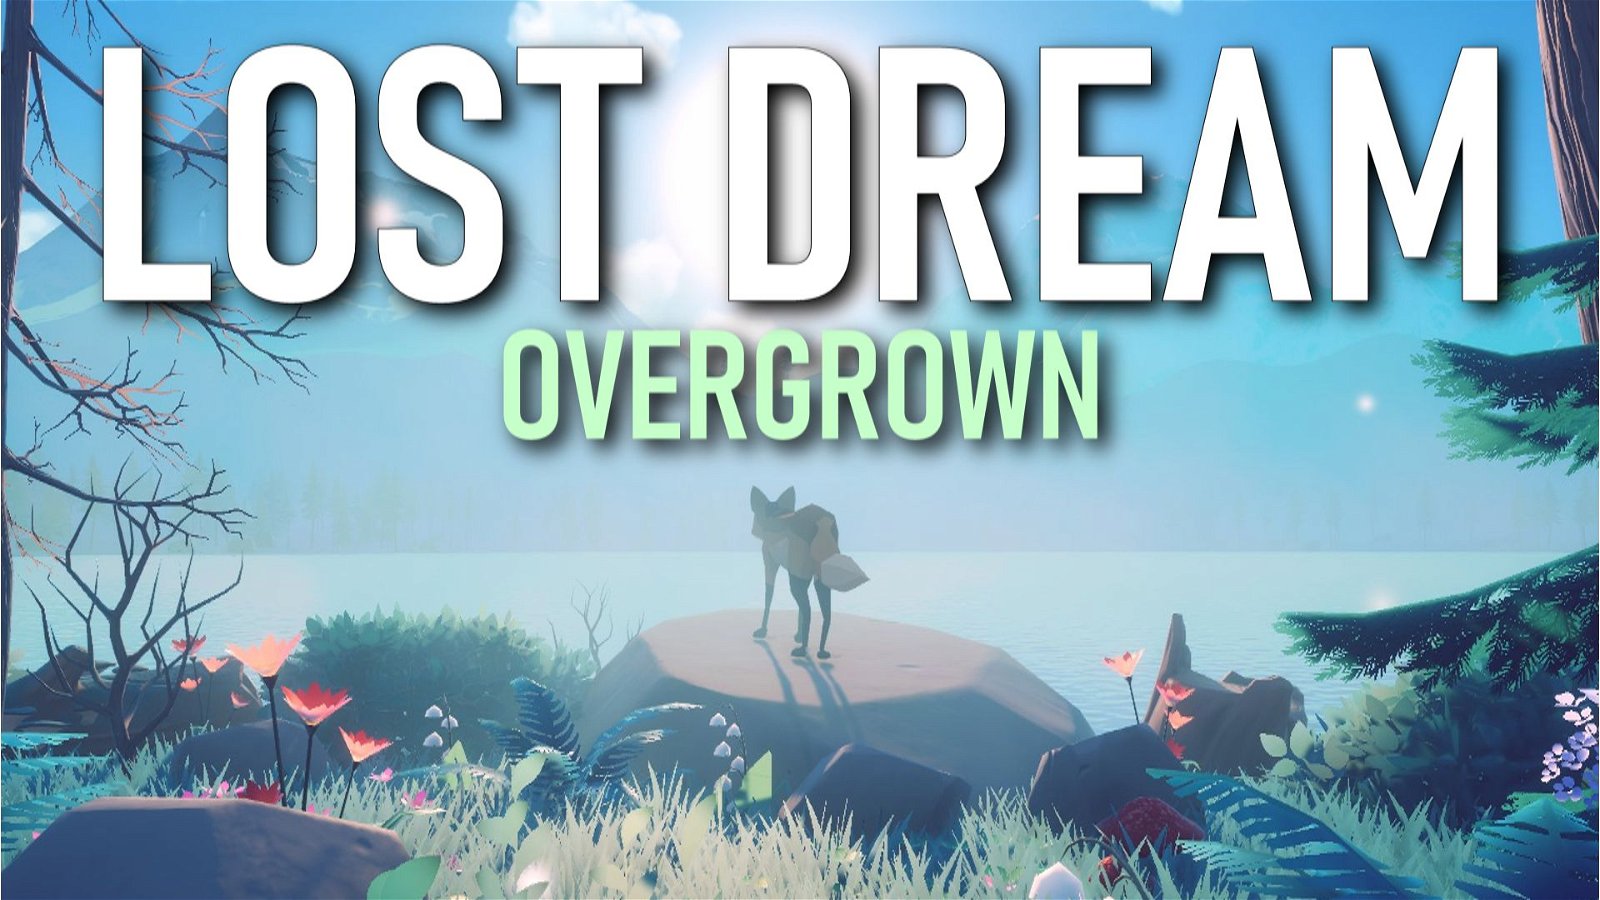 Image of Lost Dream: Overgrown